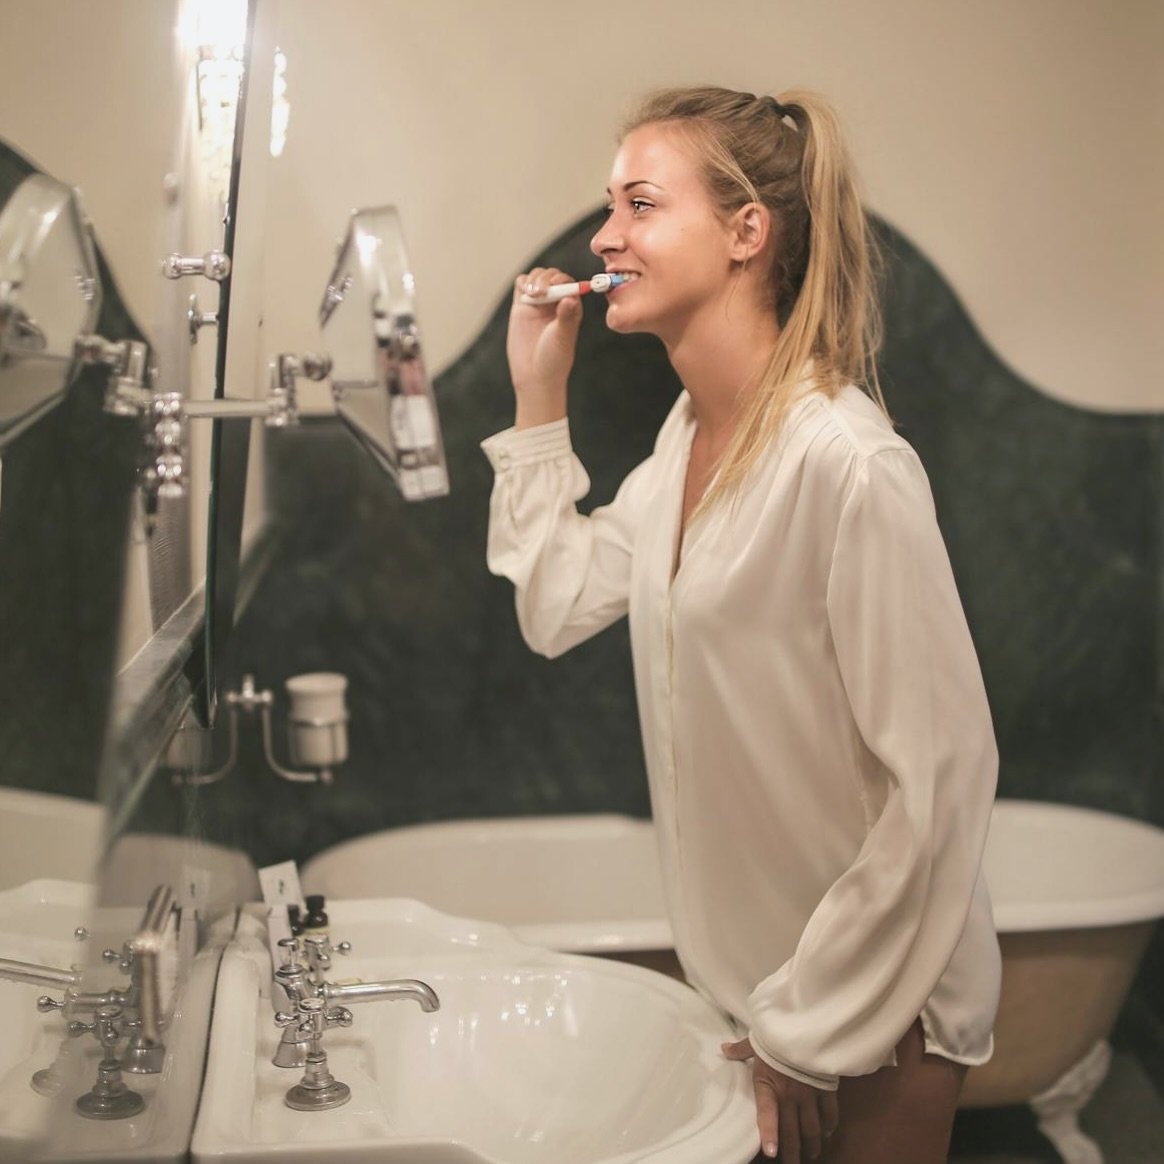 Did you know that daily brushing and cleaning between your teeth are crucial for removing plaque and preventing tooth decay and gum disease? It&rsquo;s true!

Brushing your teeth at least twice a day is essential, but are you doing it correctly? Here